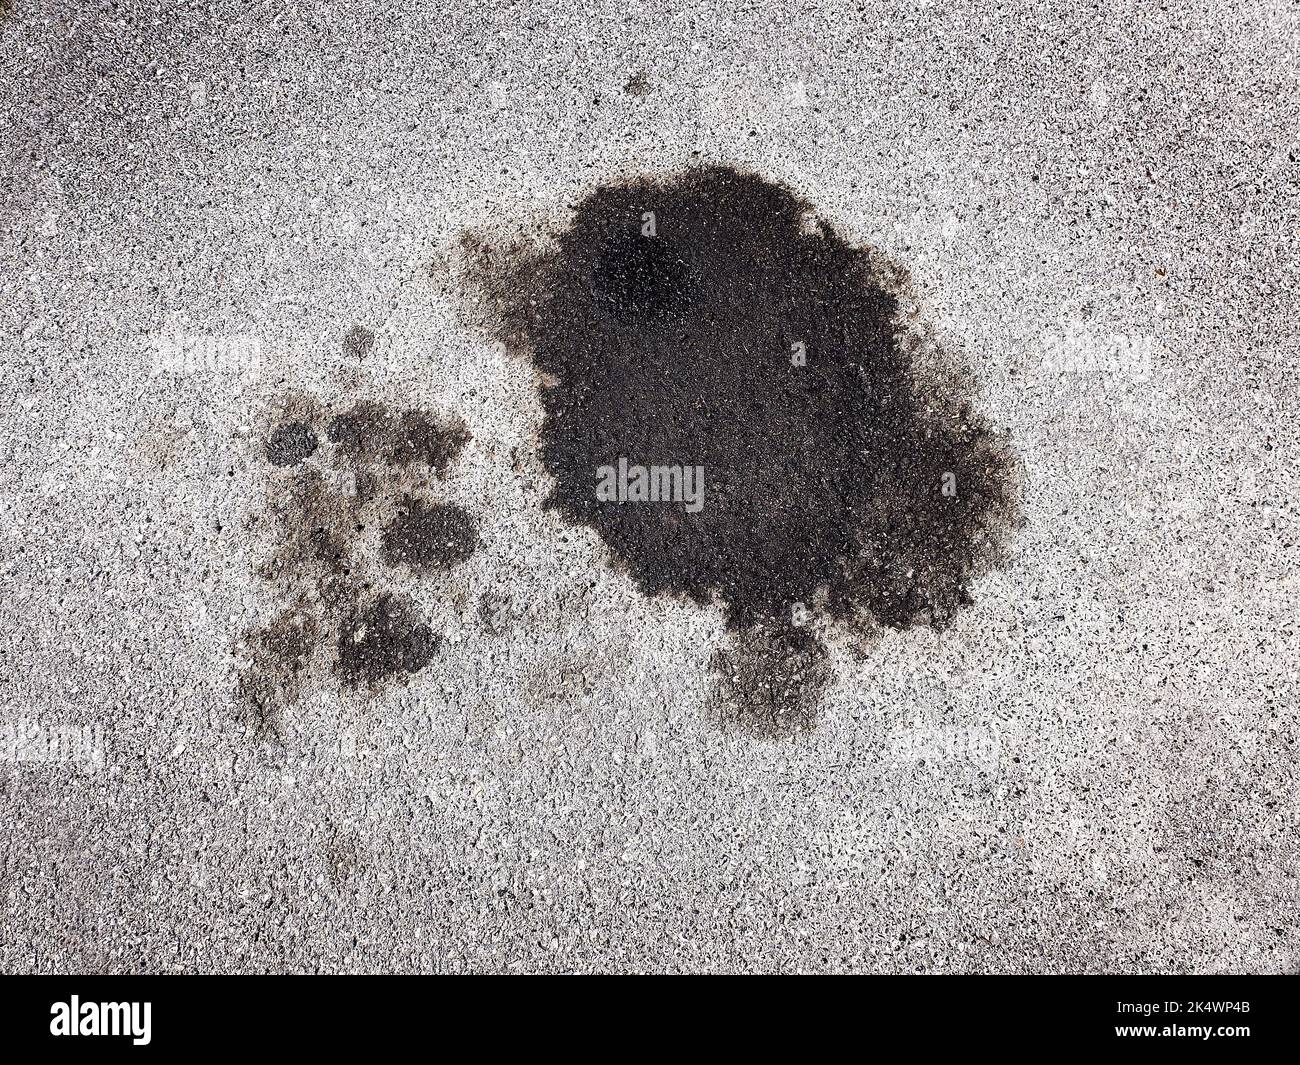 Oil spill spilled from car on roadway parking area Stock Photo